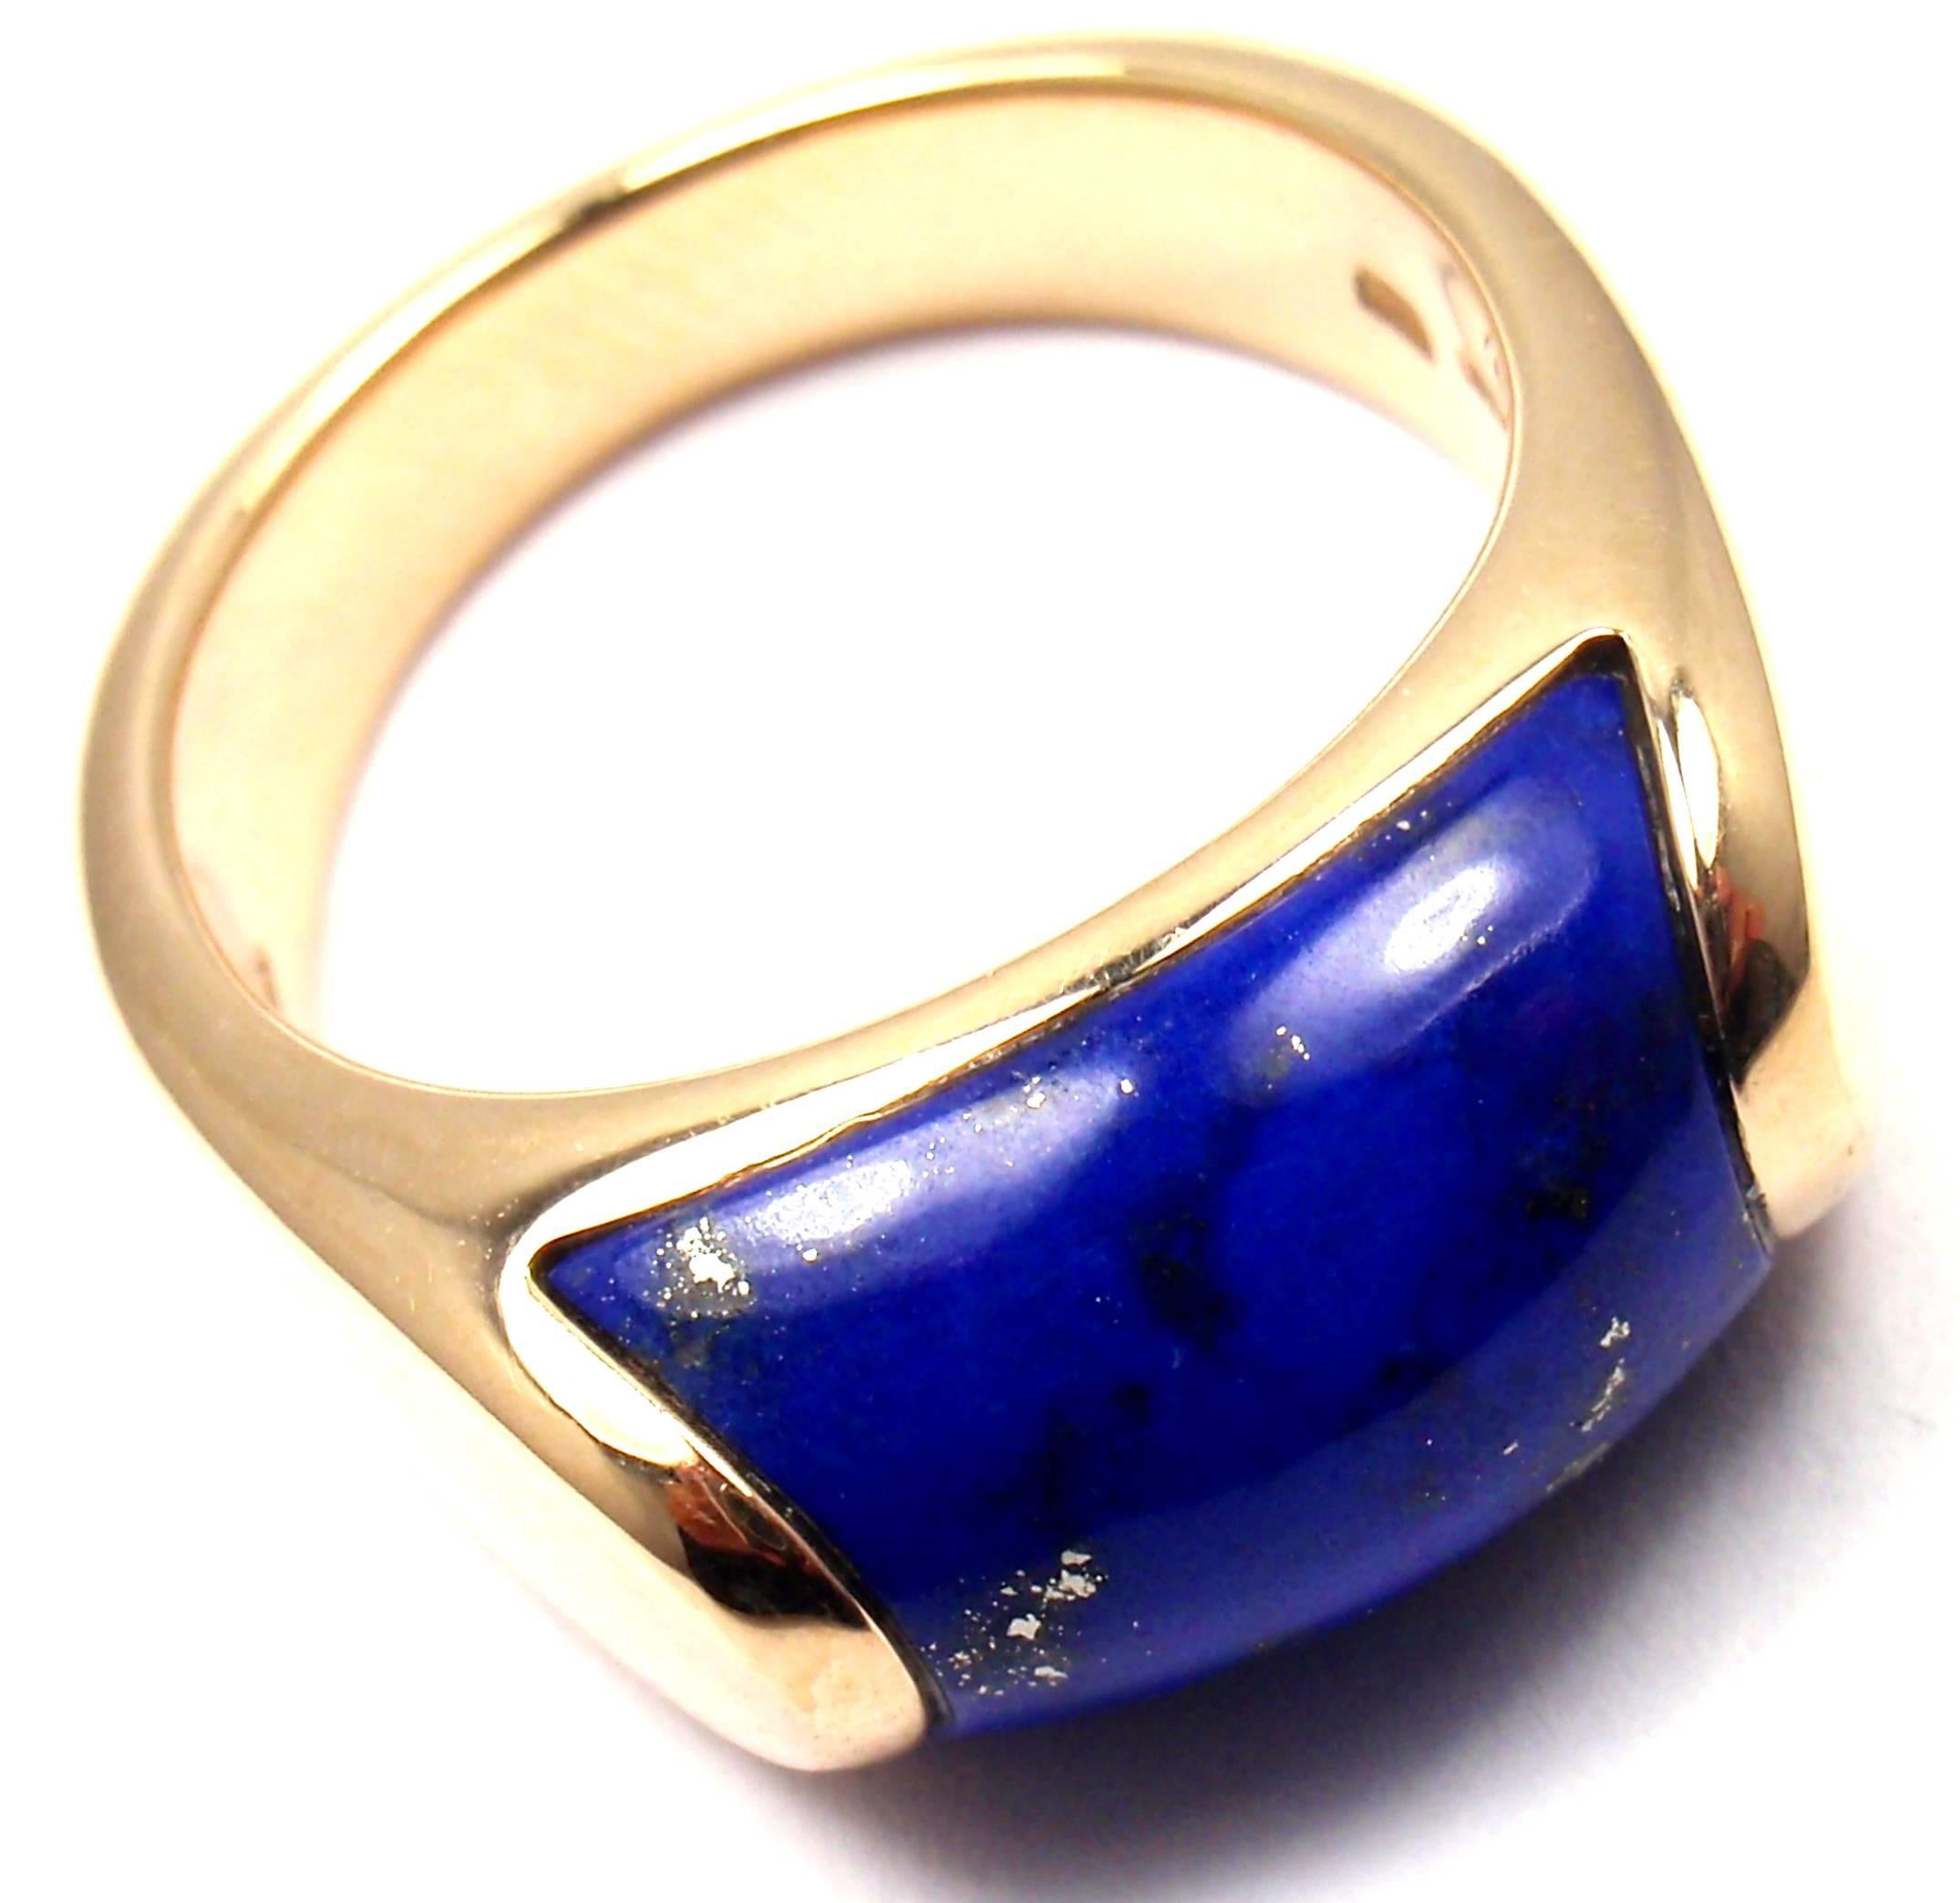 18k Yellow Gold Gold Lapis Lazuli Band Ring by Bulgari. 
With 1 Lapis Lasuli
Stone approx. 9mm x 12.5mm

Details: 
Ring Size: 6 (resize available)
Width: 9mm
Weight: 9.4 grams
Stamped Hallmarks: Bvlgari, 750, Made In Italy
*Free Shipping within the